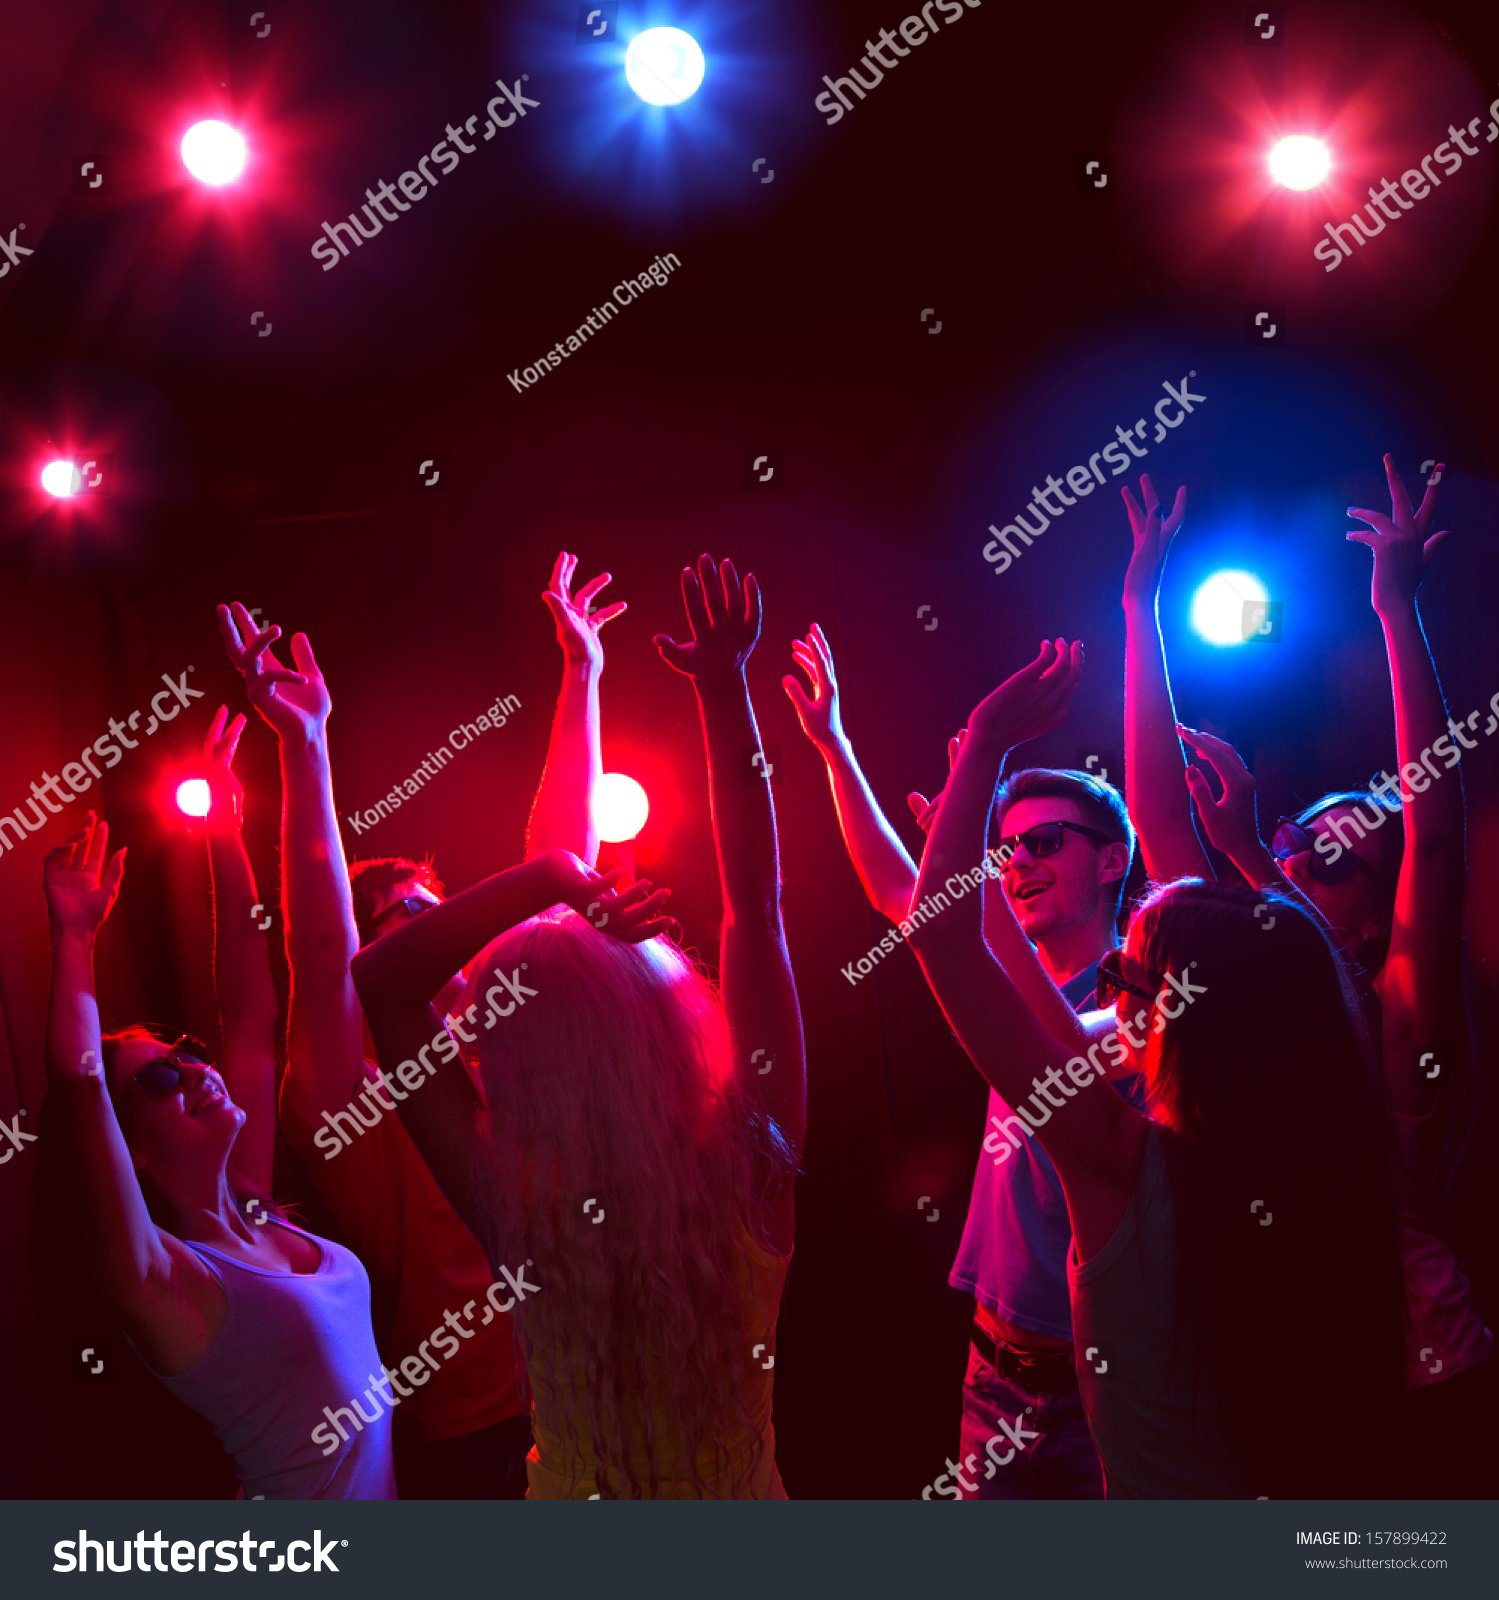 Young People Having Fun Dancing At Party Stock Photo 157899422 ...